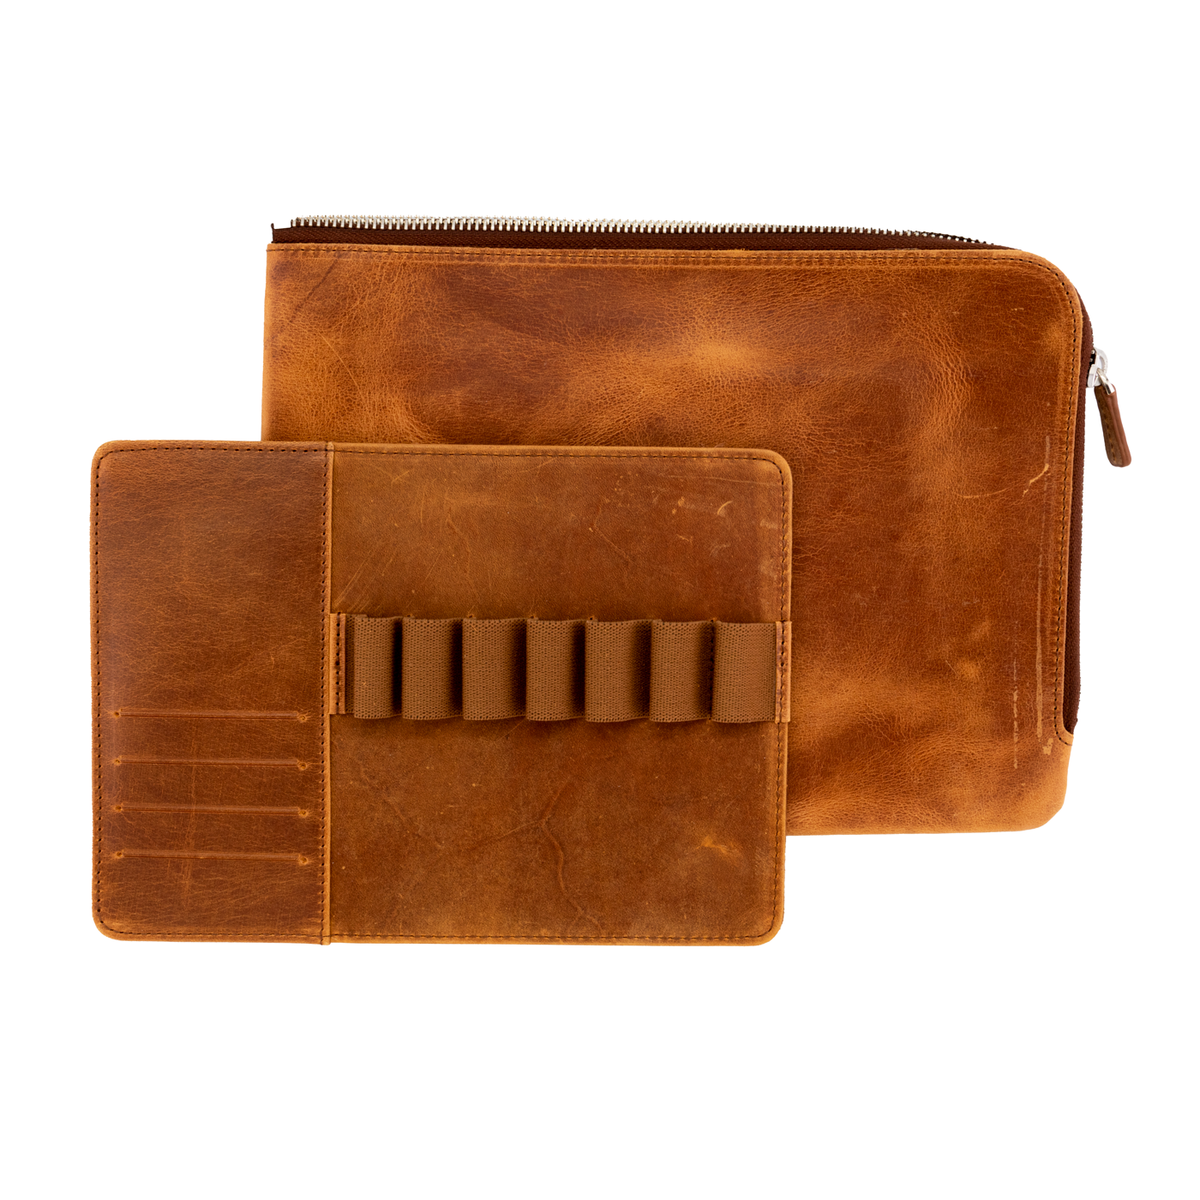 Galen Leather Zippered Writer's Bank Bag- Crazy Horse Tan